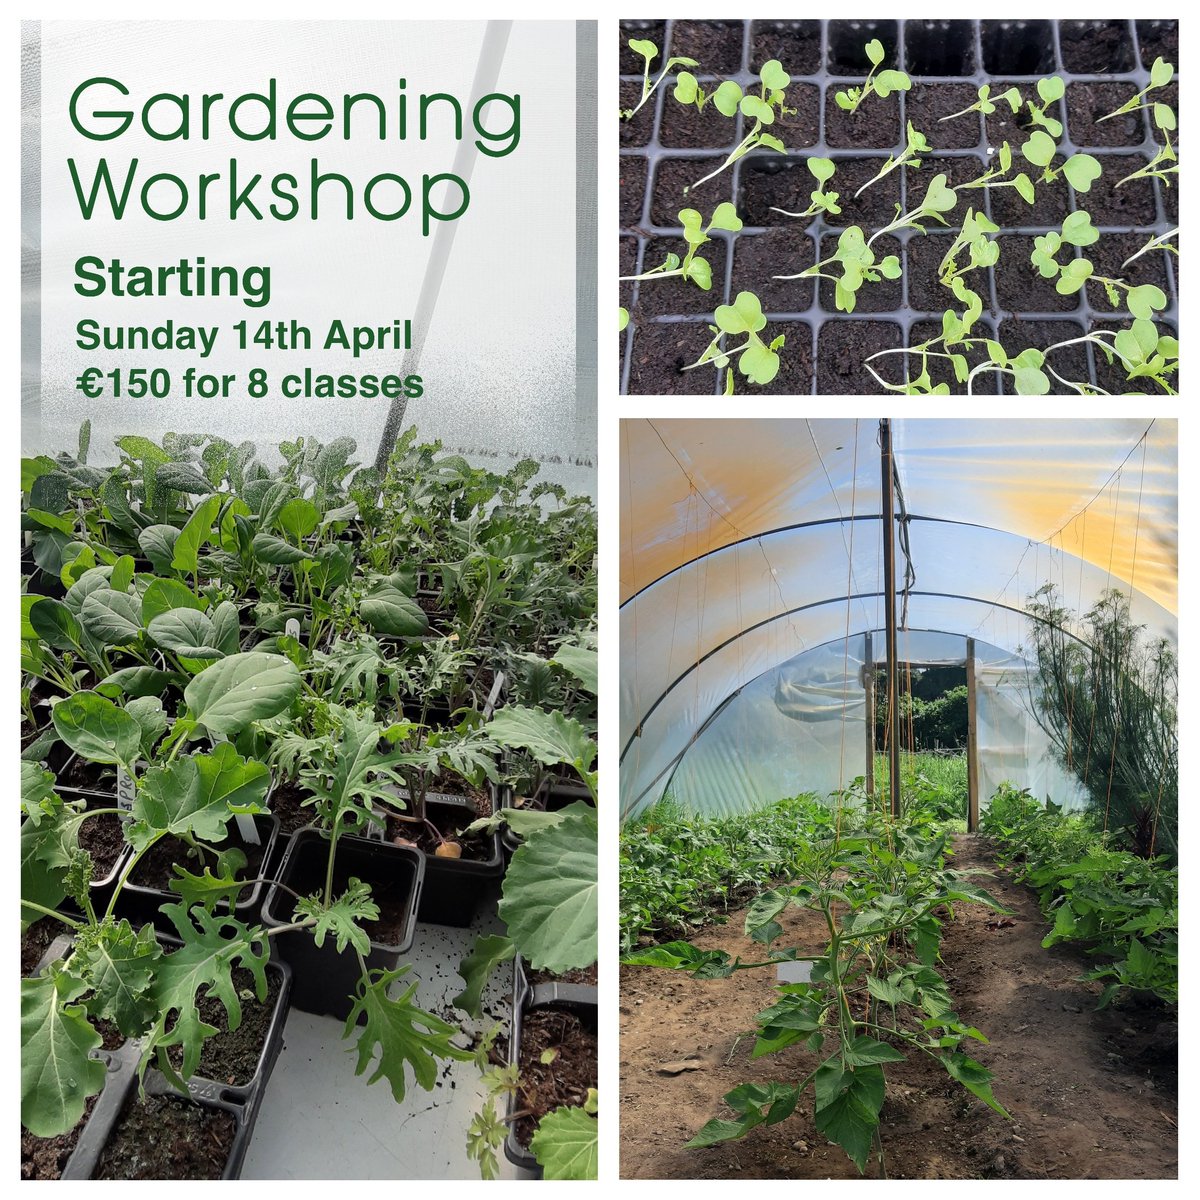 Learn to grow your own organic food with Sonairte's head gardener, taking place in our beautiful walled organic garden. This workshop takes place on the second Sunday morning every month from April to November. The starting date is the 14th April at 11am. eventbrite.ie/e/organic-gard…